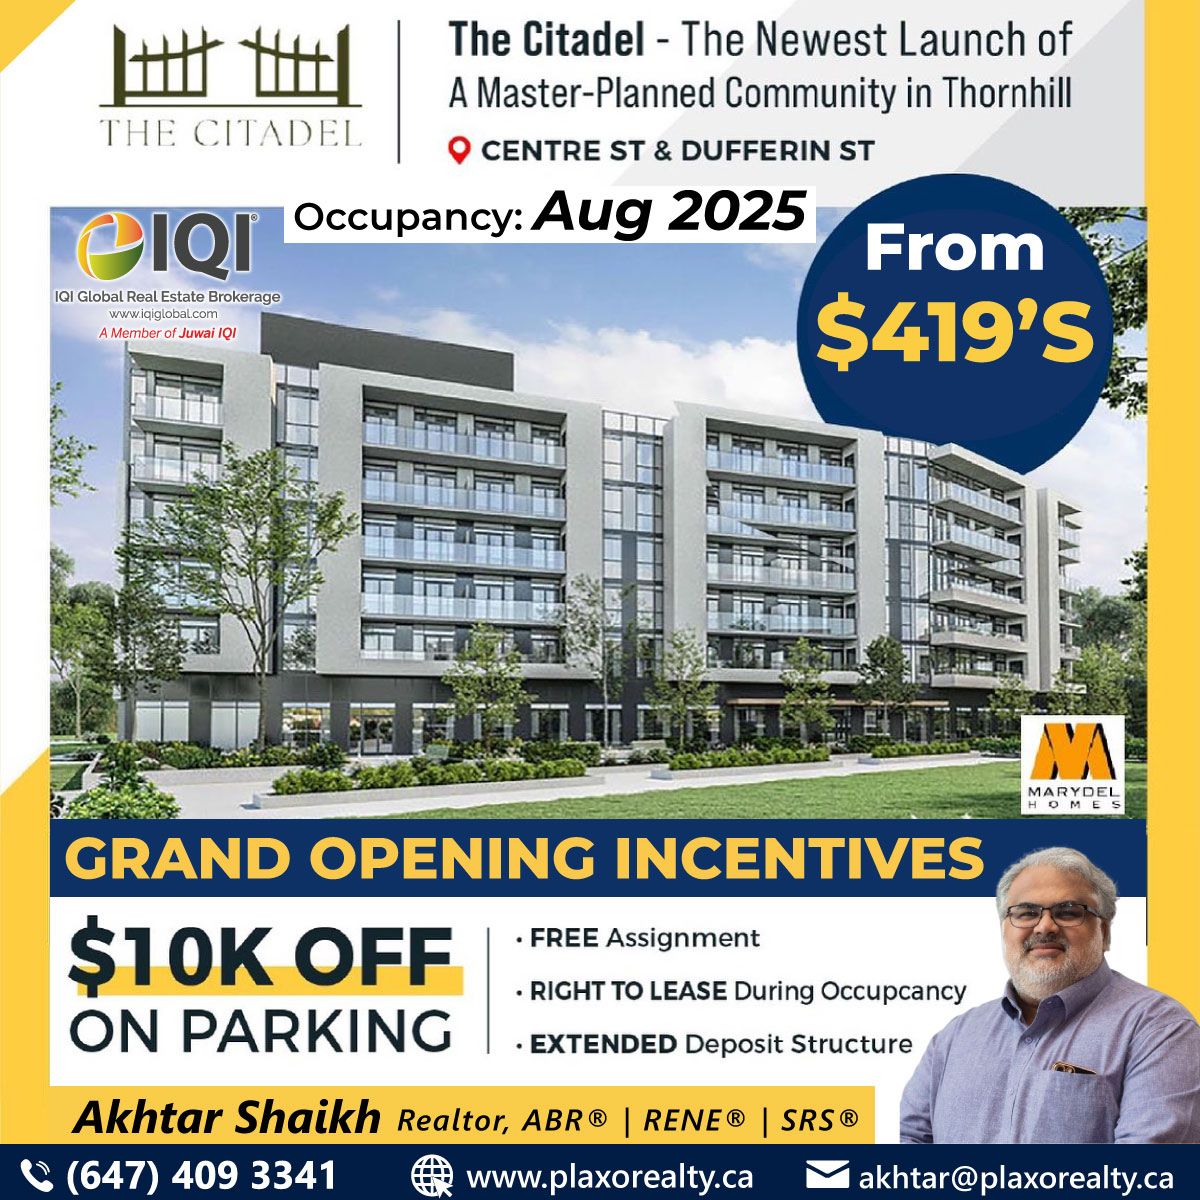 ✨The Citadel-An affordable condo project is now coming soon to the heart of Thornhill
.
.
#akhtariqi #akhtarshaikh #FTHS #FTHB #firsttimehomebuyer #newhomeowner #marydelhomes #gatesatthornhill #torontotownhomes #torontocondos #gtarealestate  #gtacondos  #TheCitadelthornhill